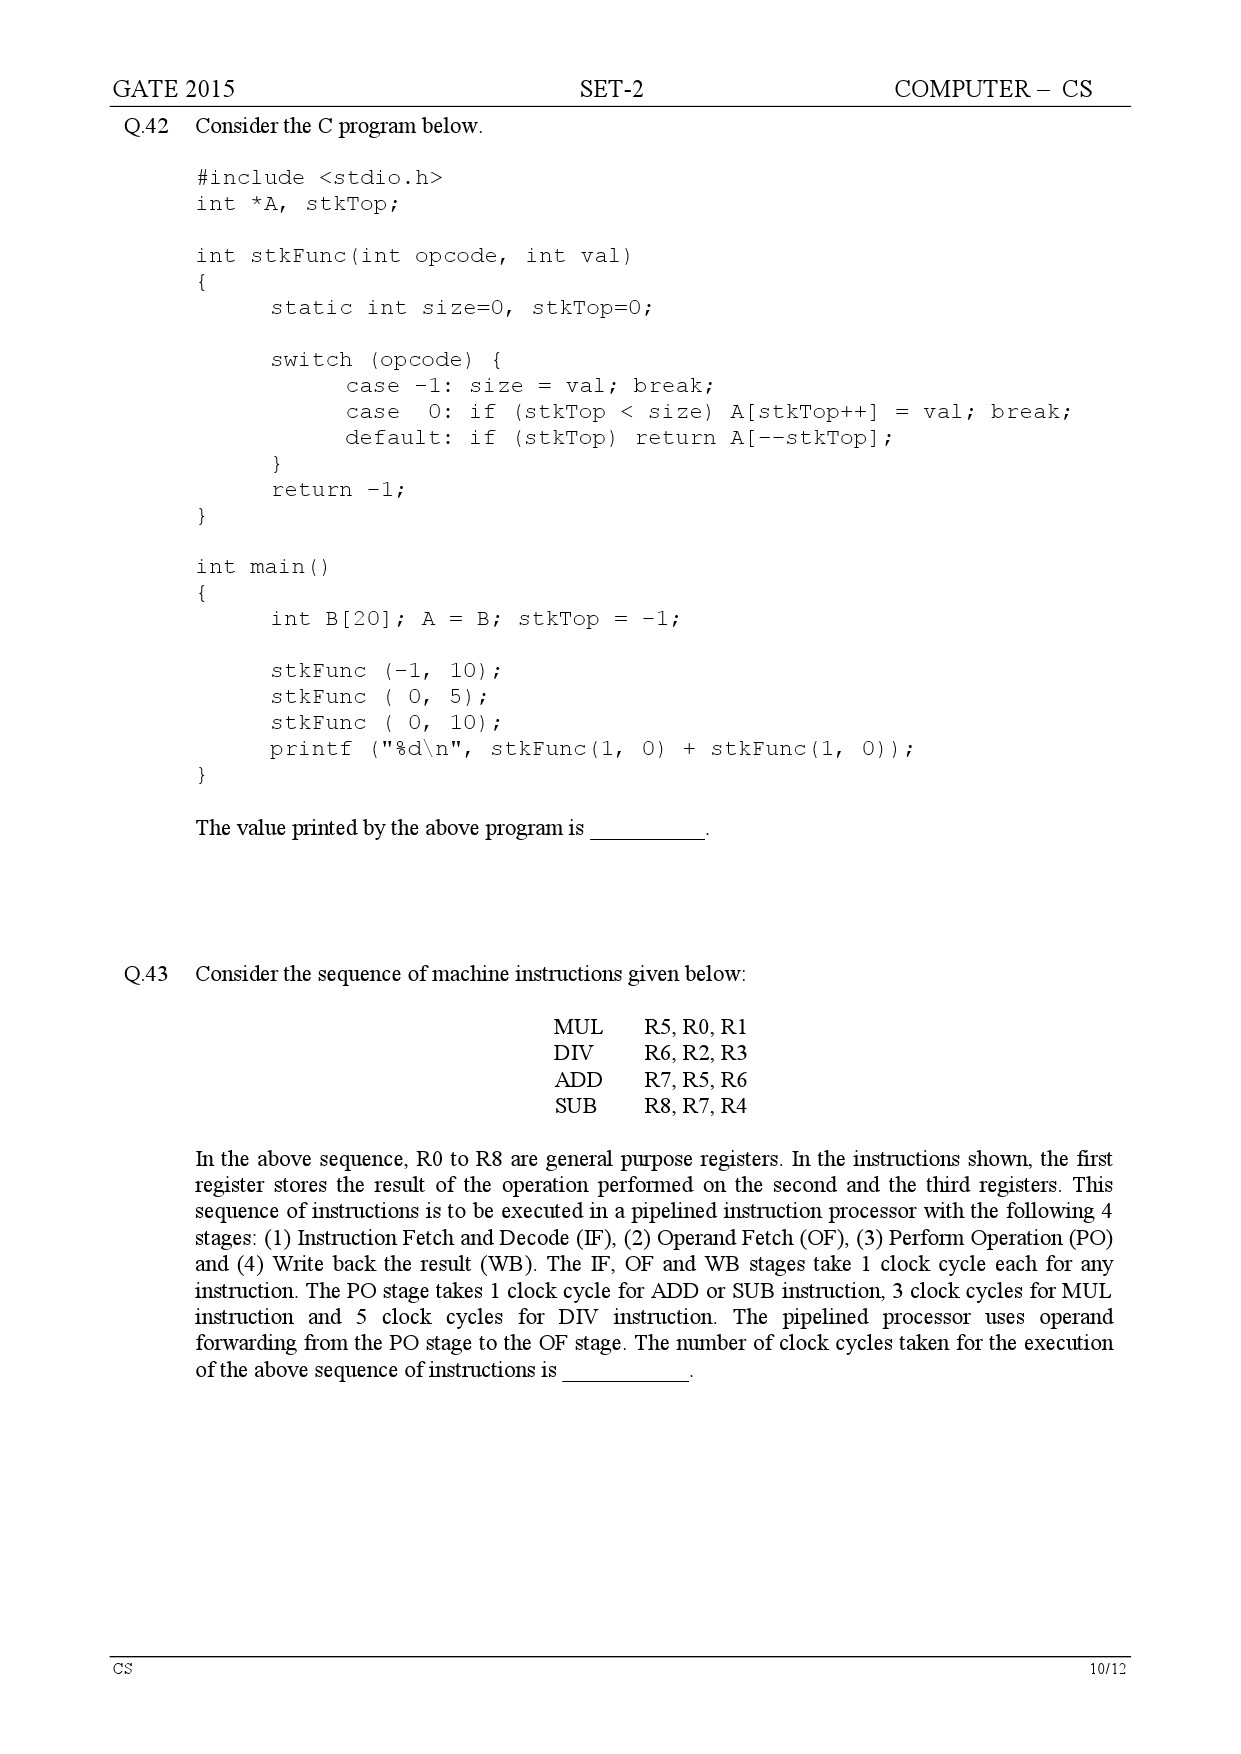 GATE Exam Question Paper 2015 Computer Science and Information Technology Set 2 10